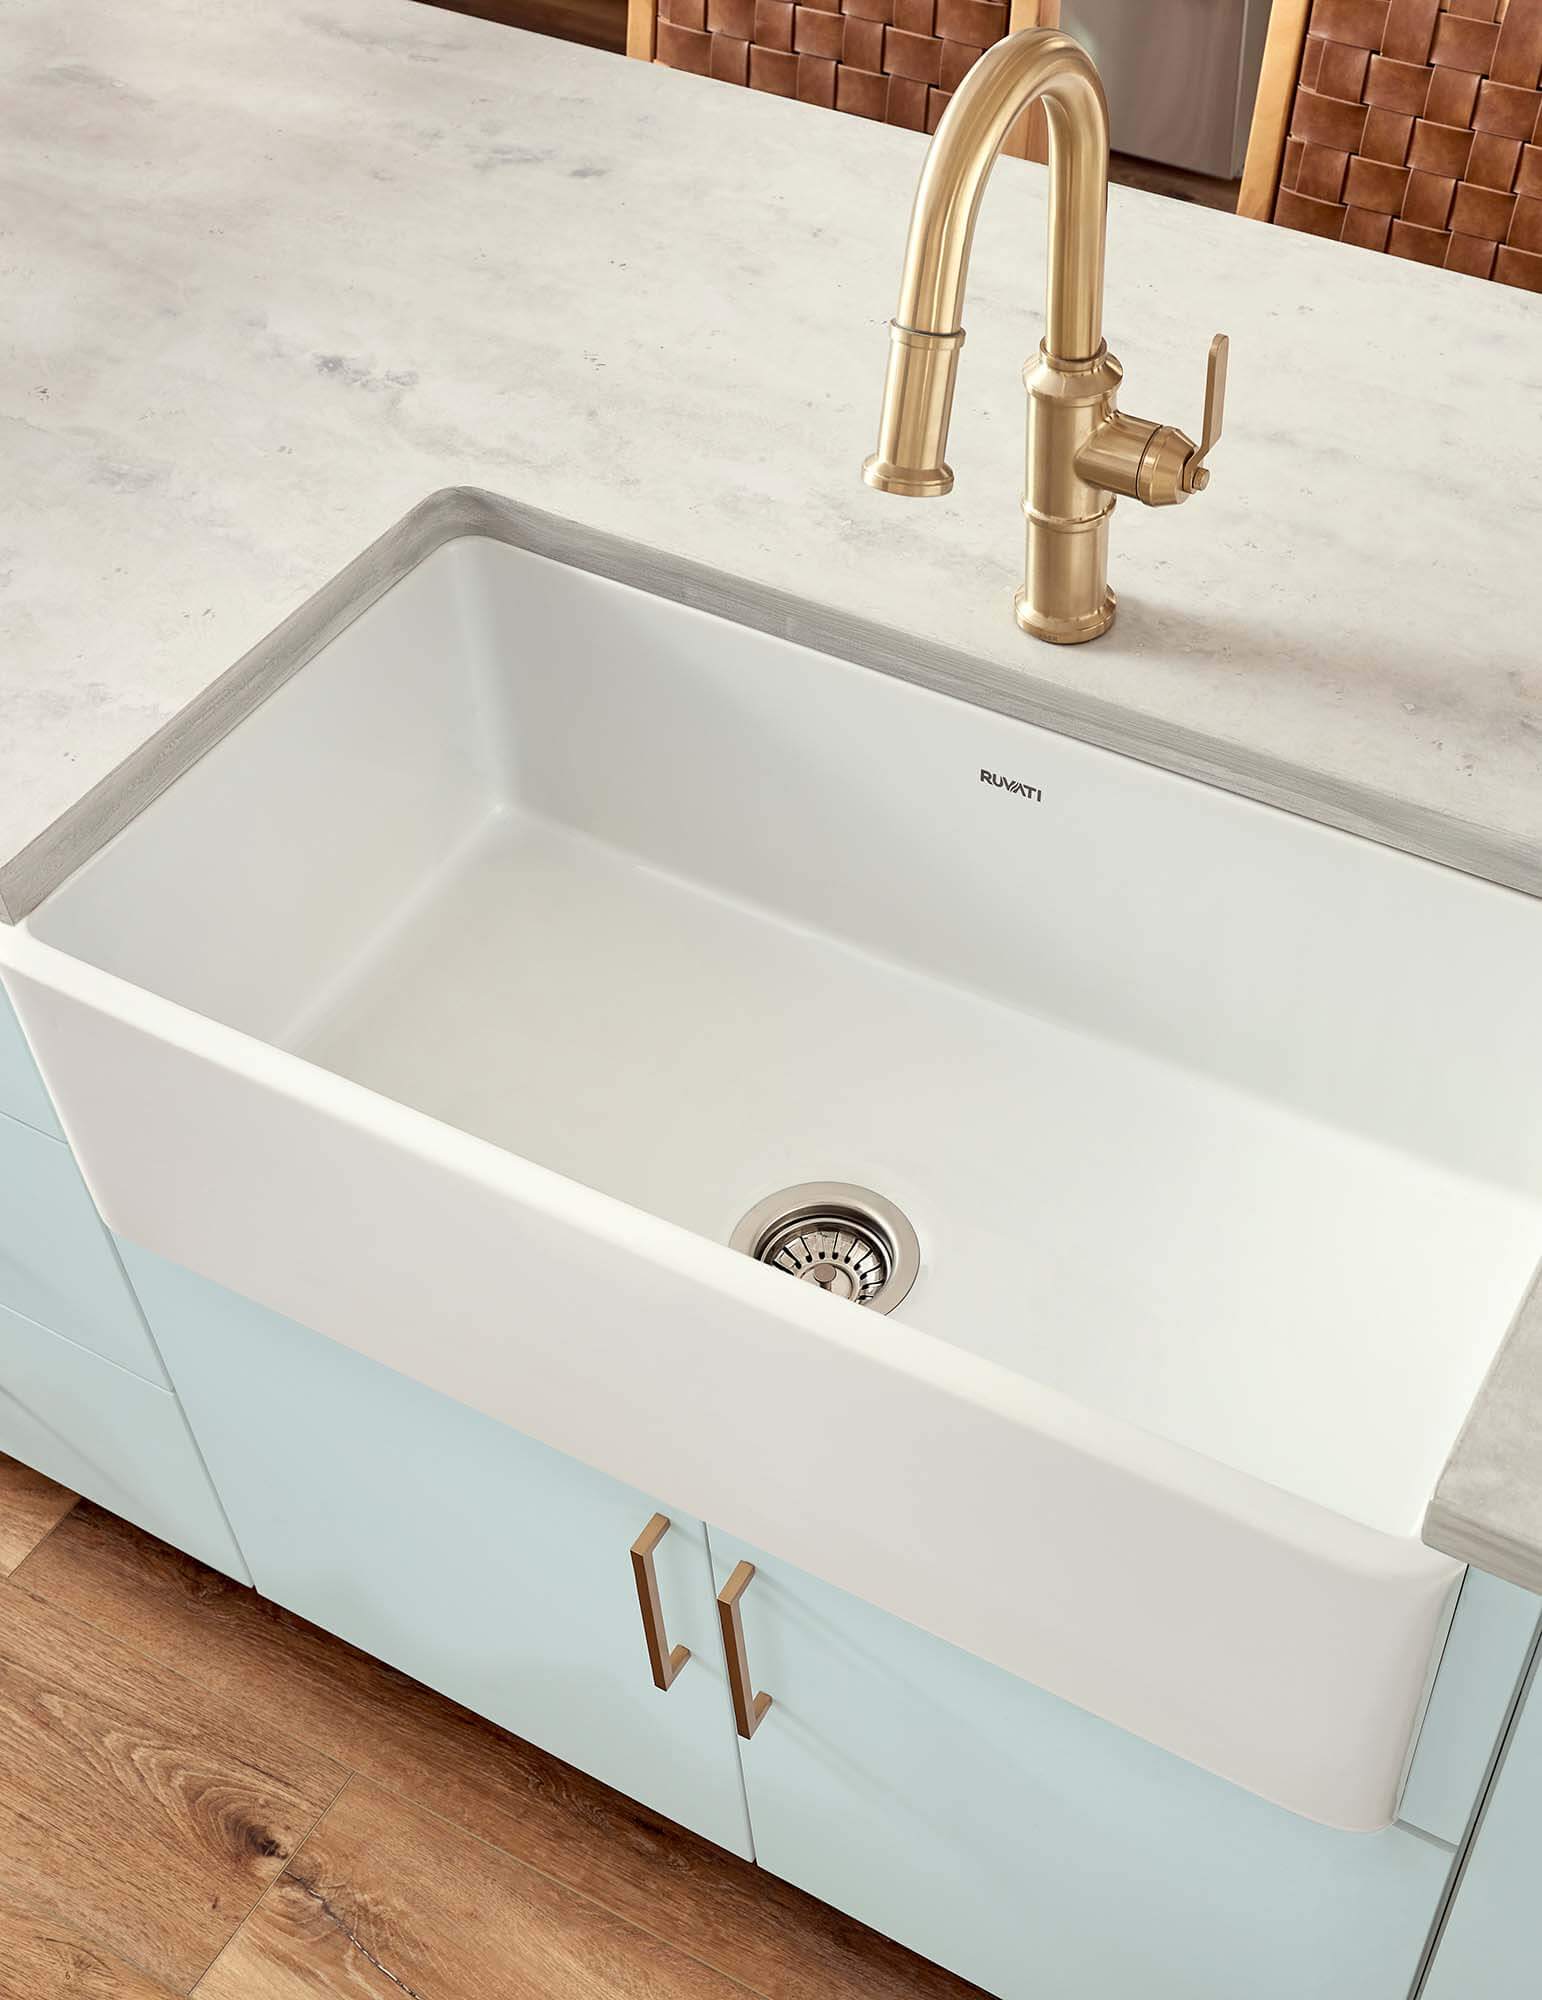 The Pros and Cons of Composite Sinks: Choosing the Perfect Sink